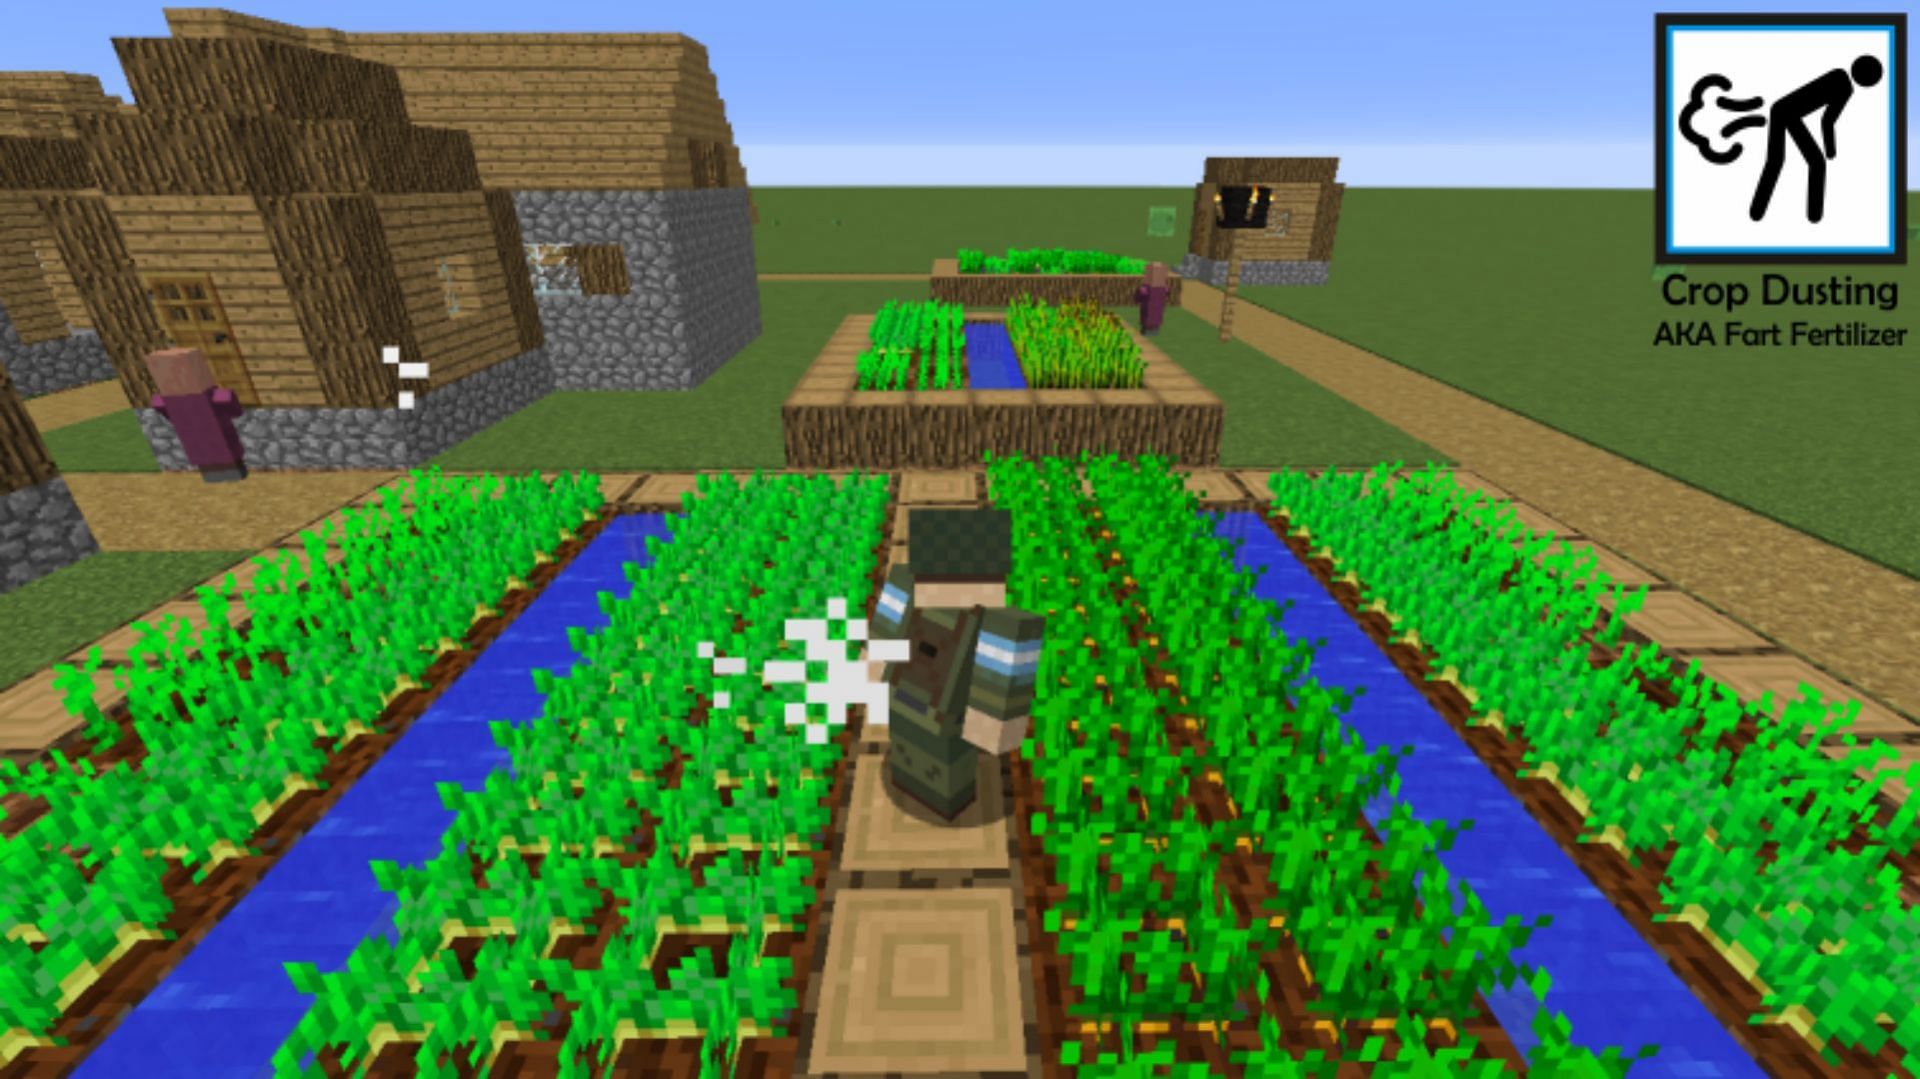 Crop dusting hilariously allows players to fart on the crops to fertilize them in Minecraft (Image via CurseForge)